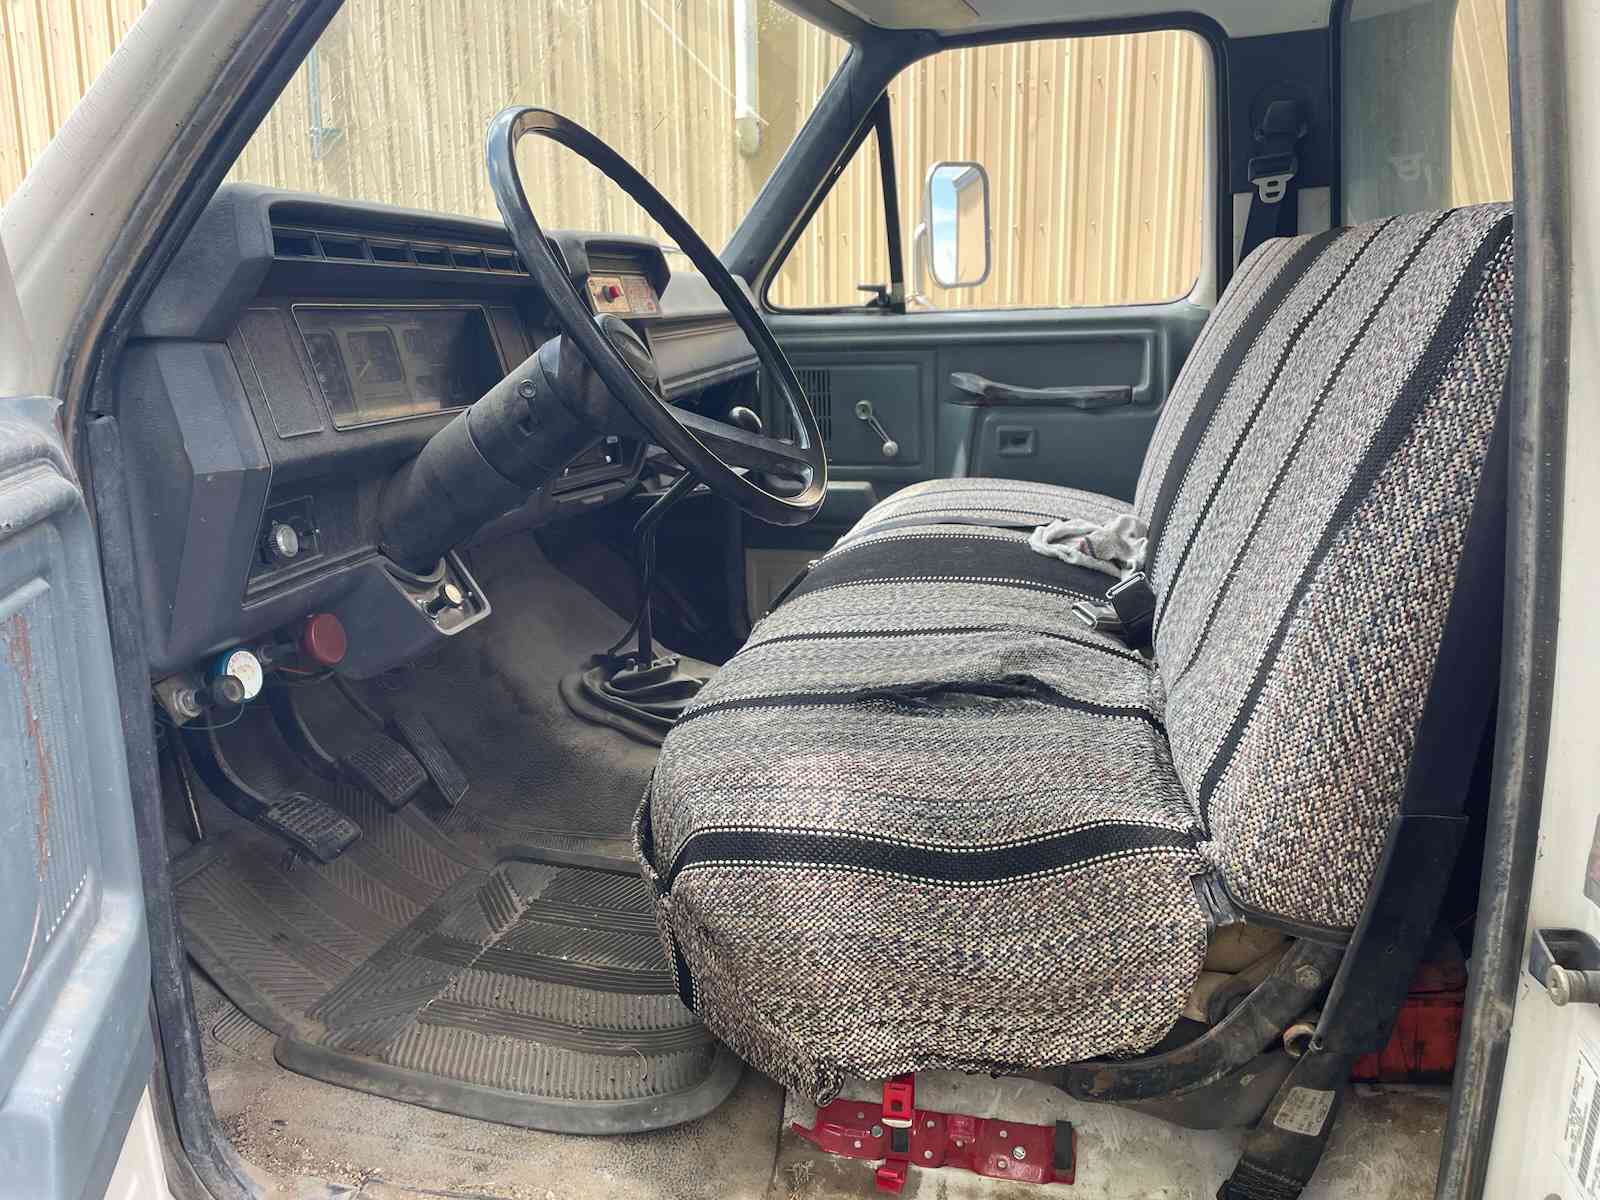 1991 F600 Ford dump truck - interior from driver's side